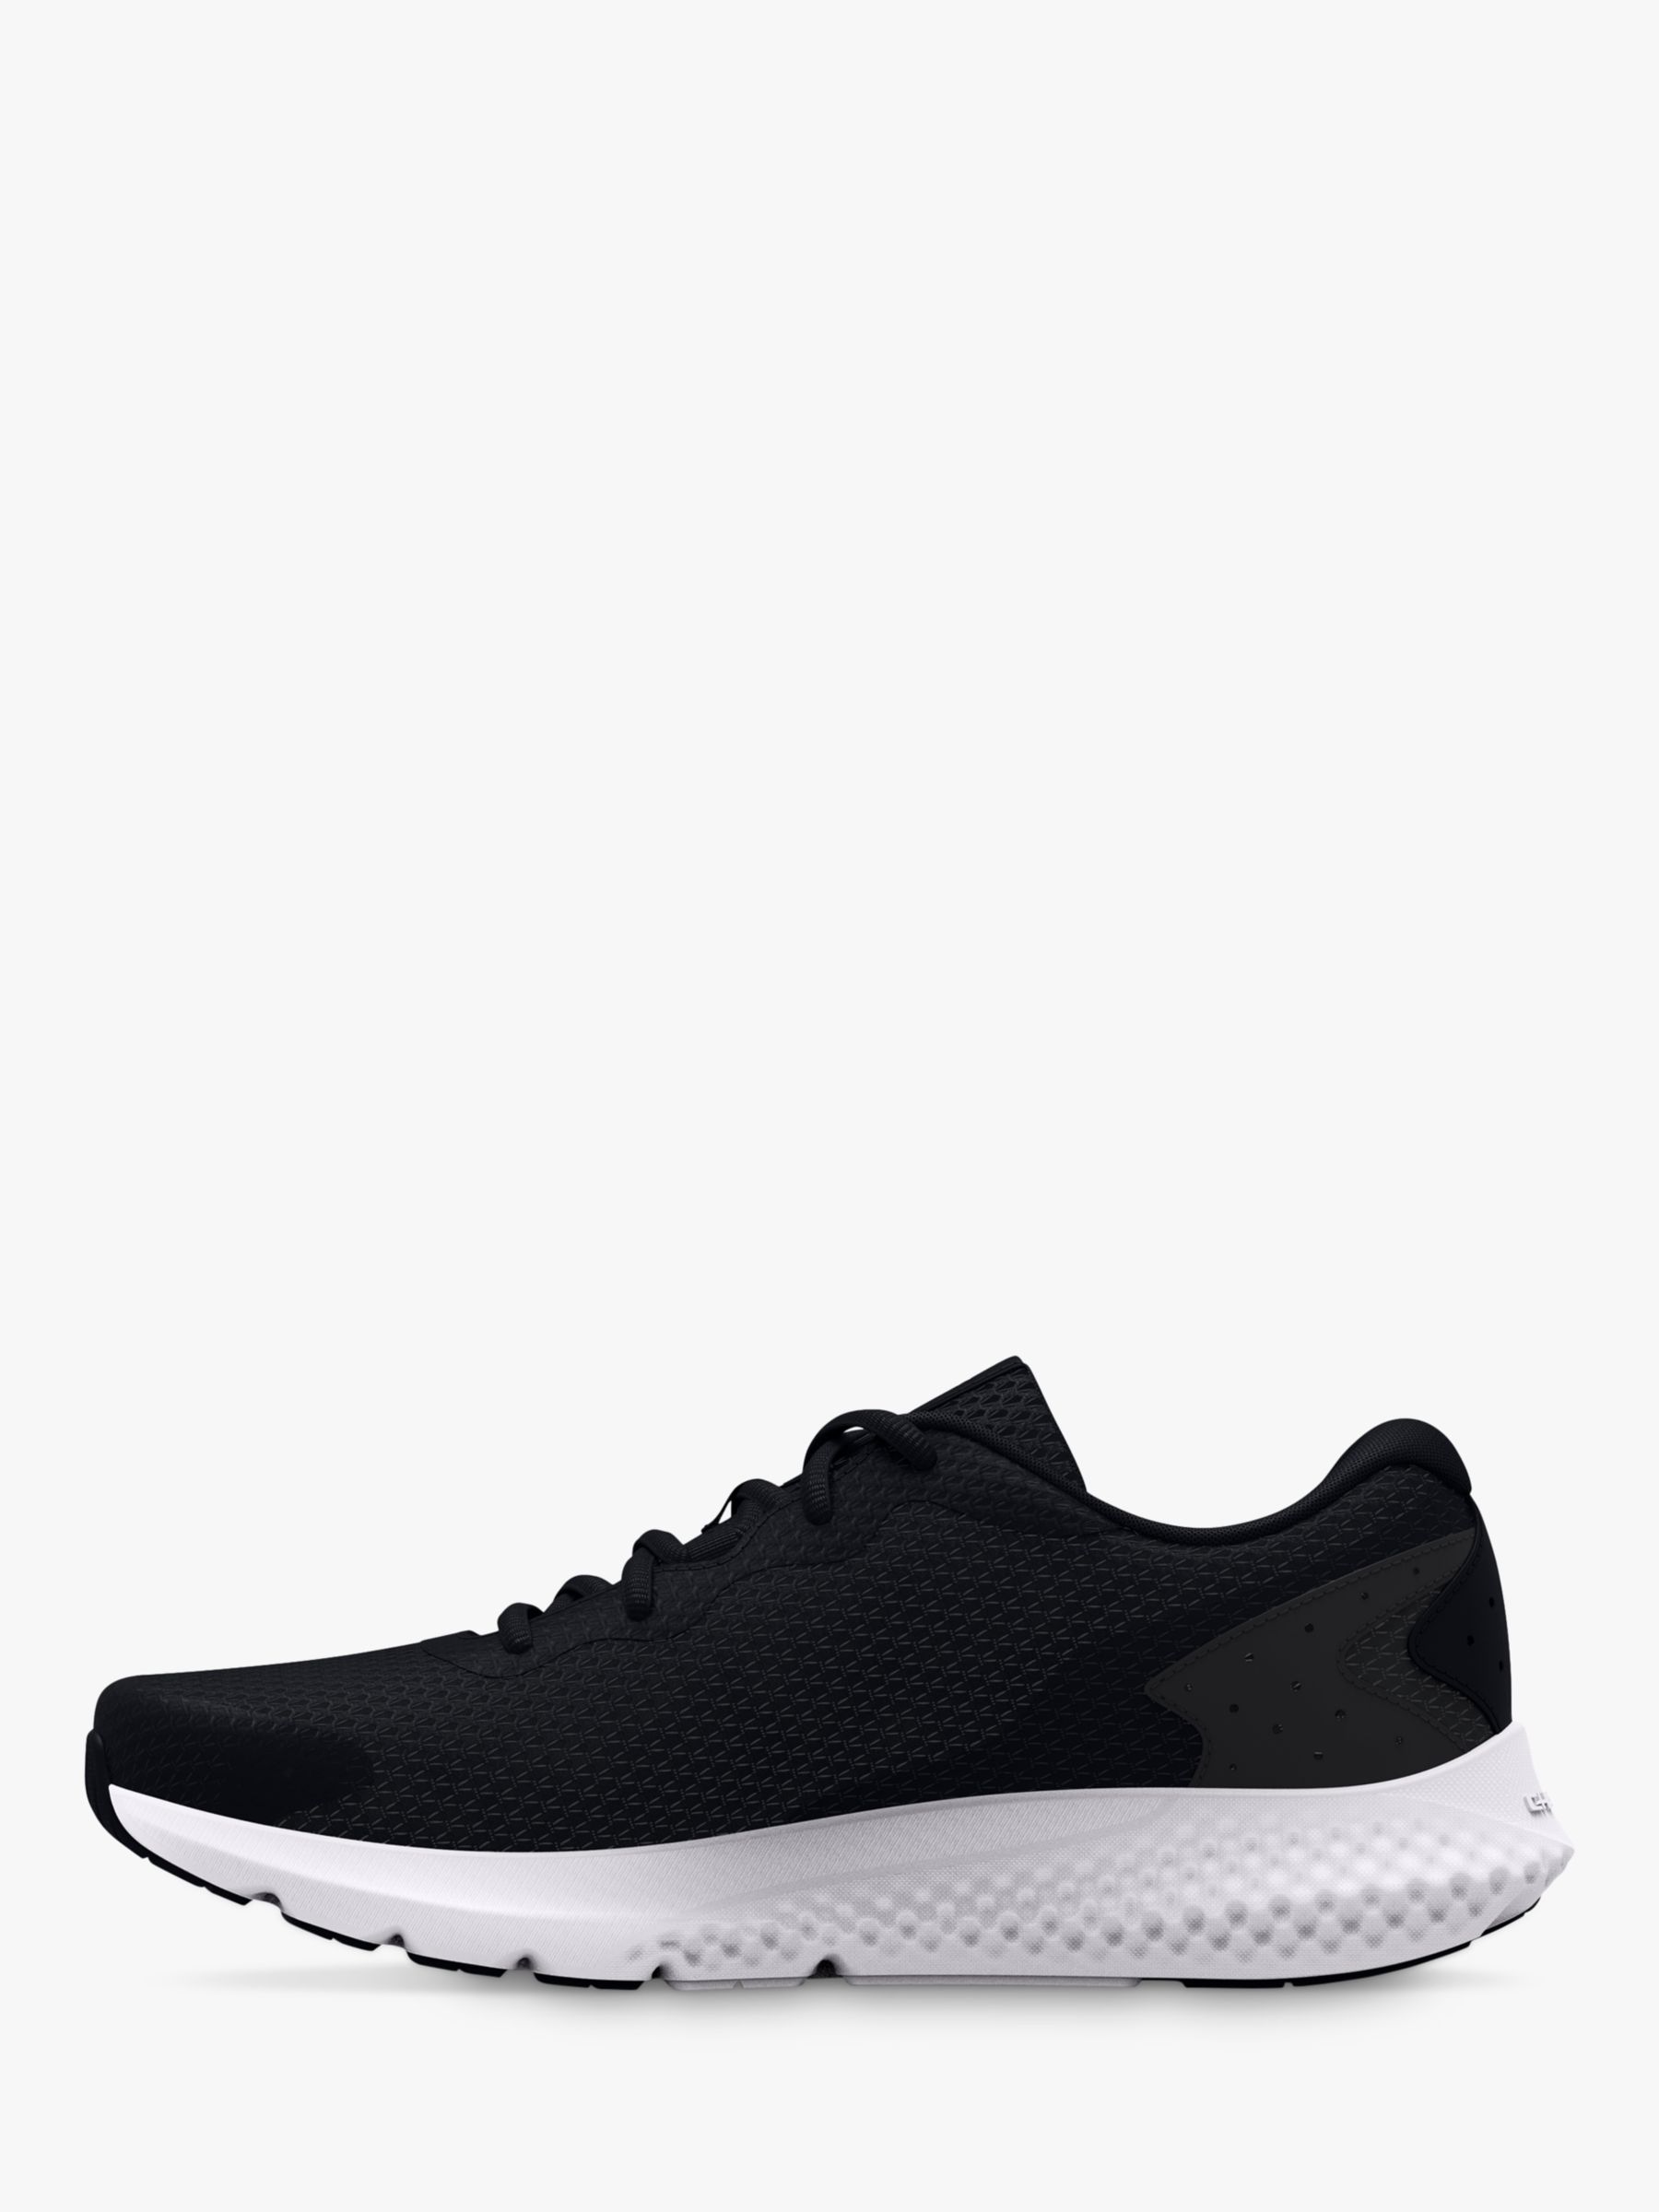 Under Armour Men's Charged Rogue 3 Knit, (001) Black